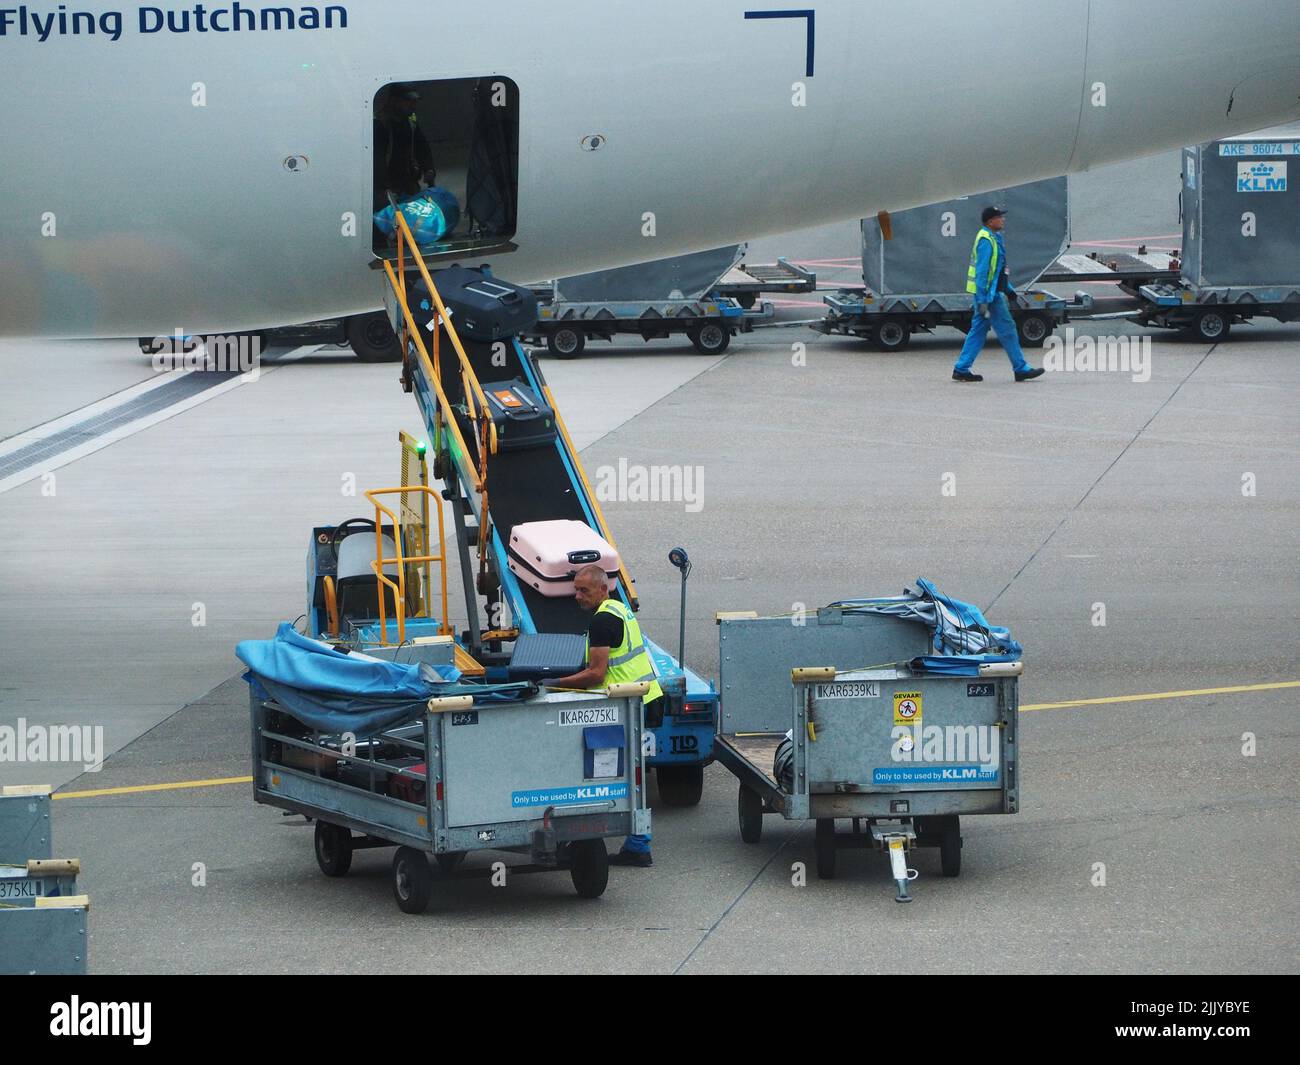 Luggage baggage handlers unloading a KLM aeroplane at Schiphol Airport, Amsterdam, the Netherlands Stock Photo